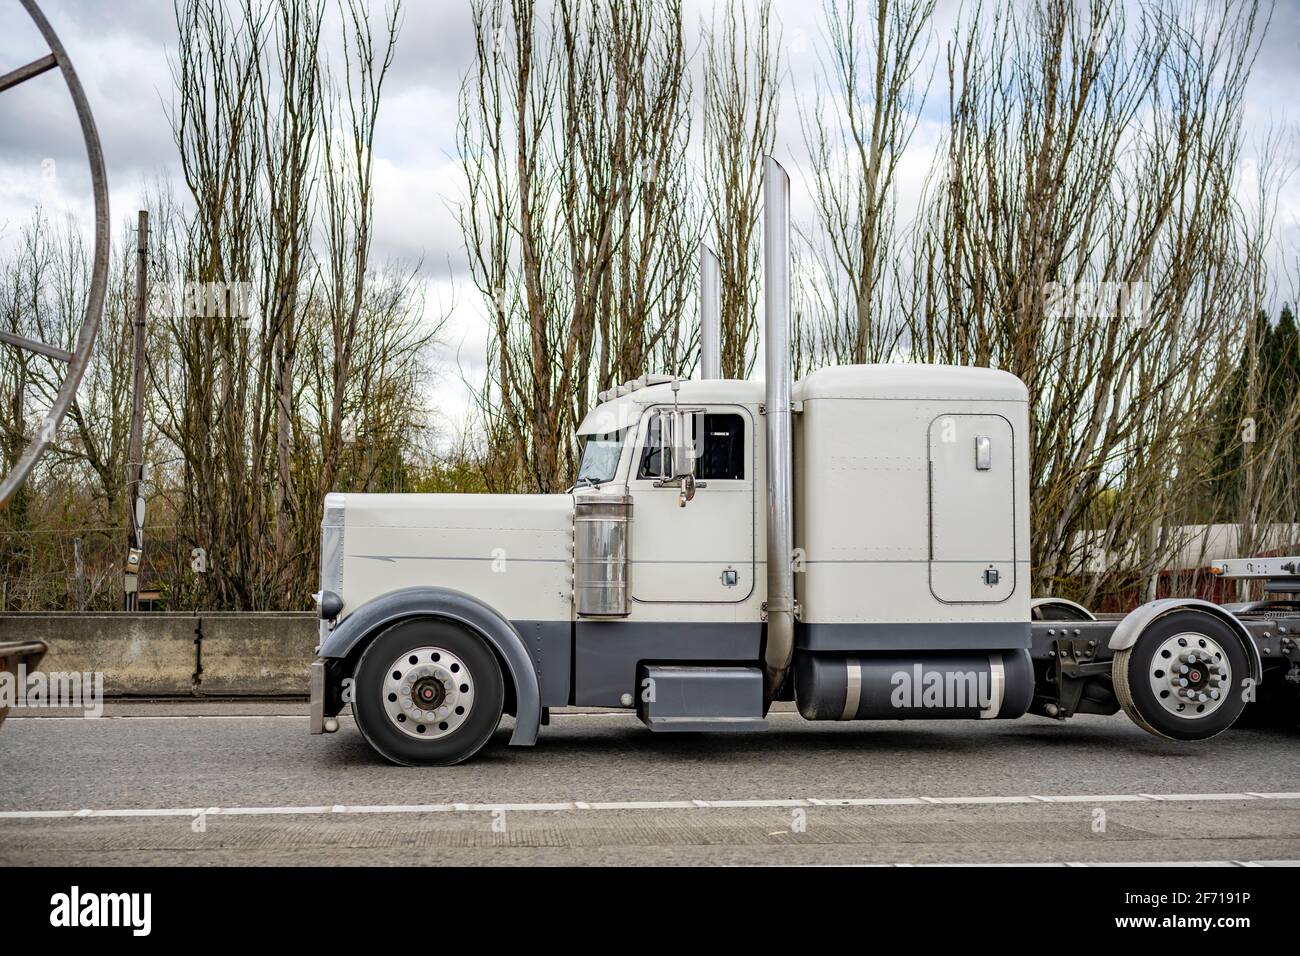 Classic American idol big rig bonnet semi truck tractor with chrome  accessories and vertical Exhaust pipes transporting cargo on flat bed semi  trailer Stock Photo - Alamy